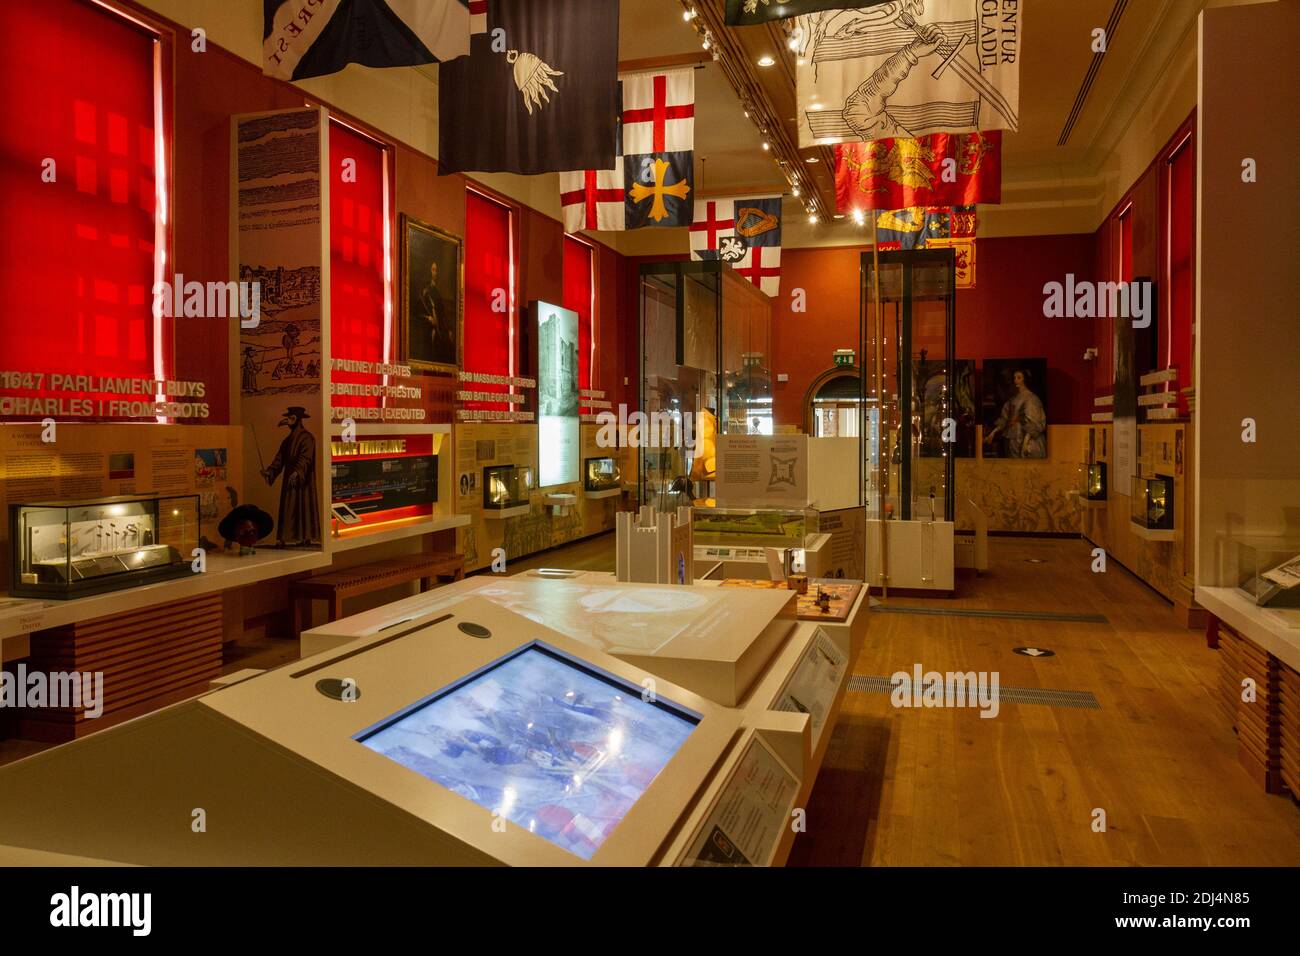 General view of displays in the National Civil War Centre, Newark Museum, Newark-on-Trent, Notts, UK. Stock Photo